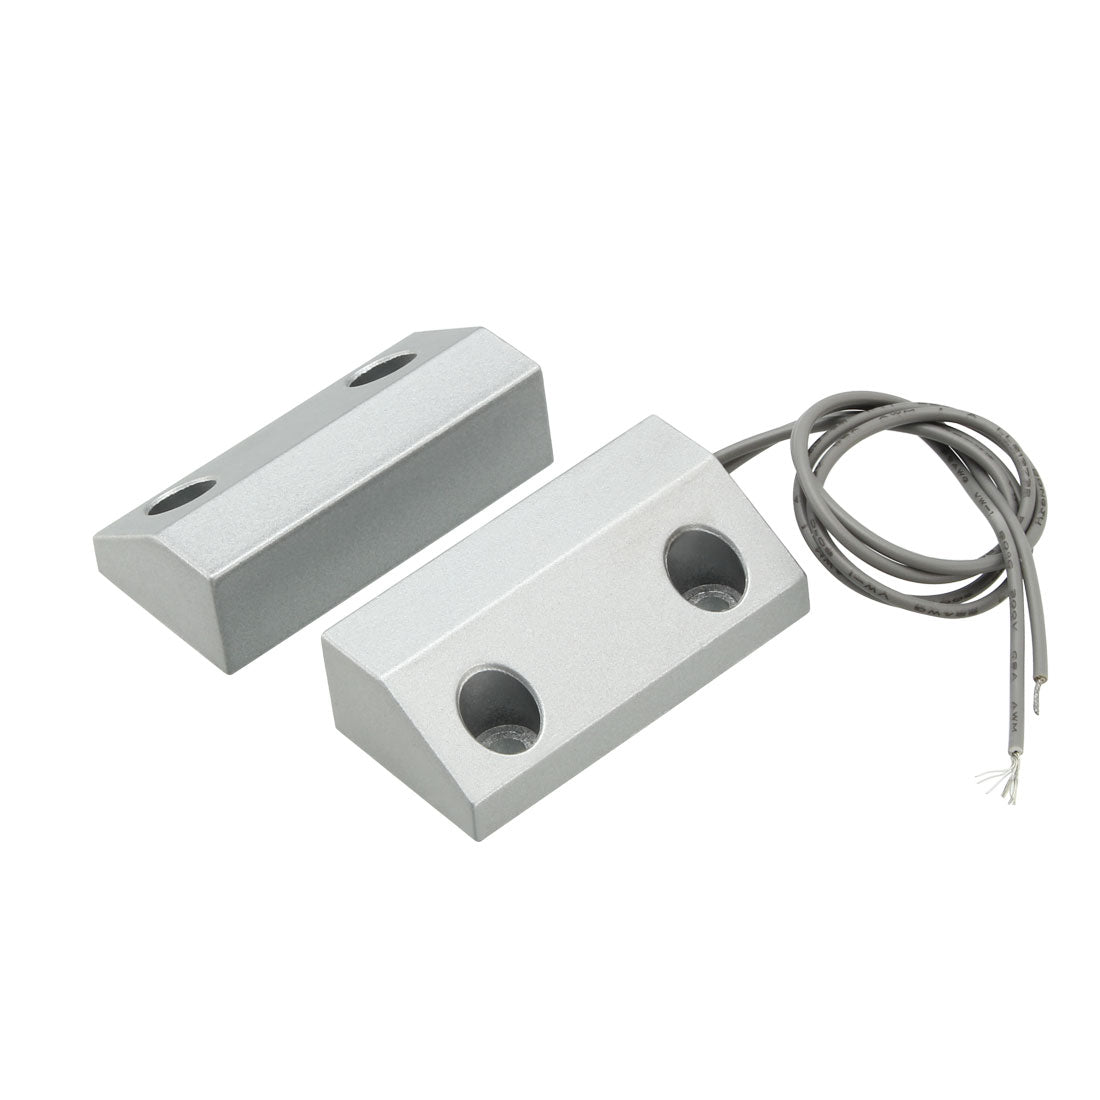 uxcell Uxcell MC-56 NC Alarm Security Rolling Gate Garage Door Contact Magnetic Reed Switch Silver Gray